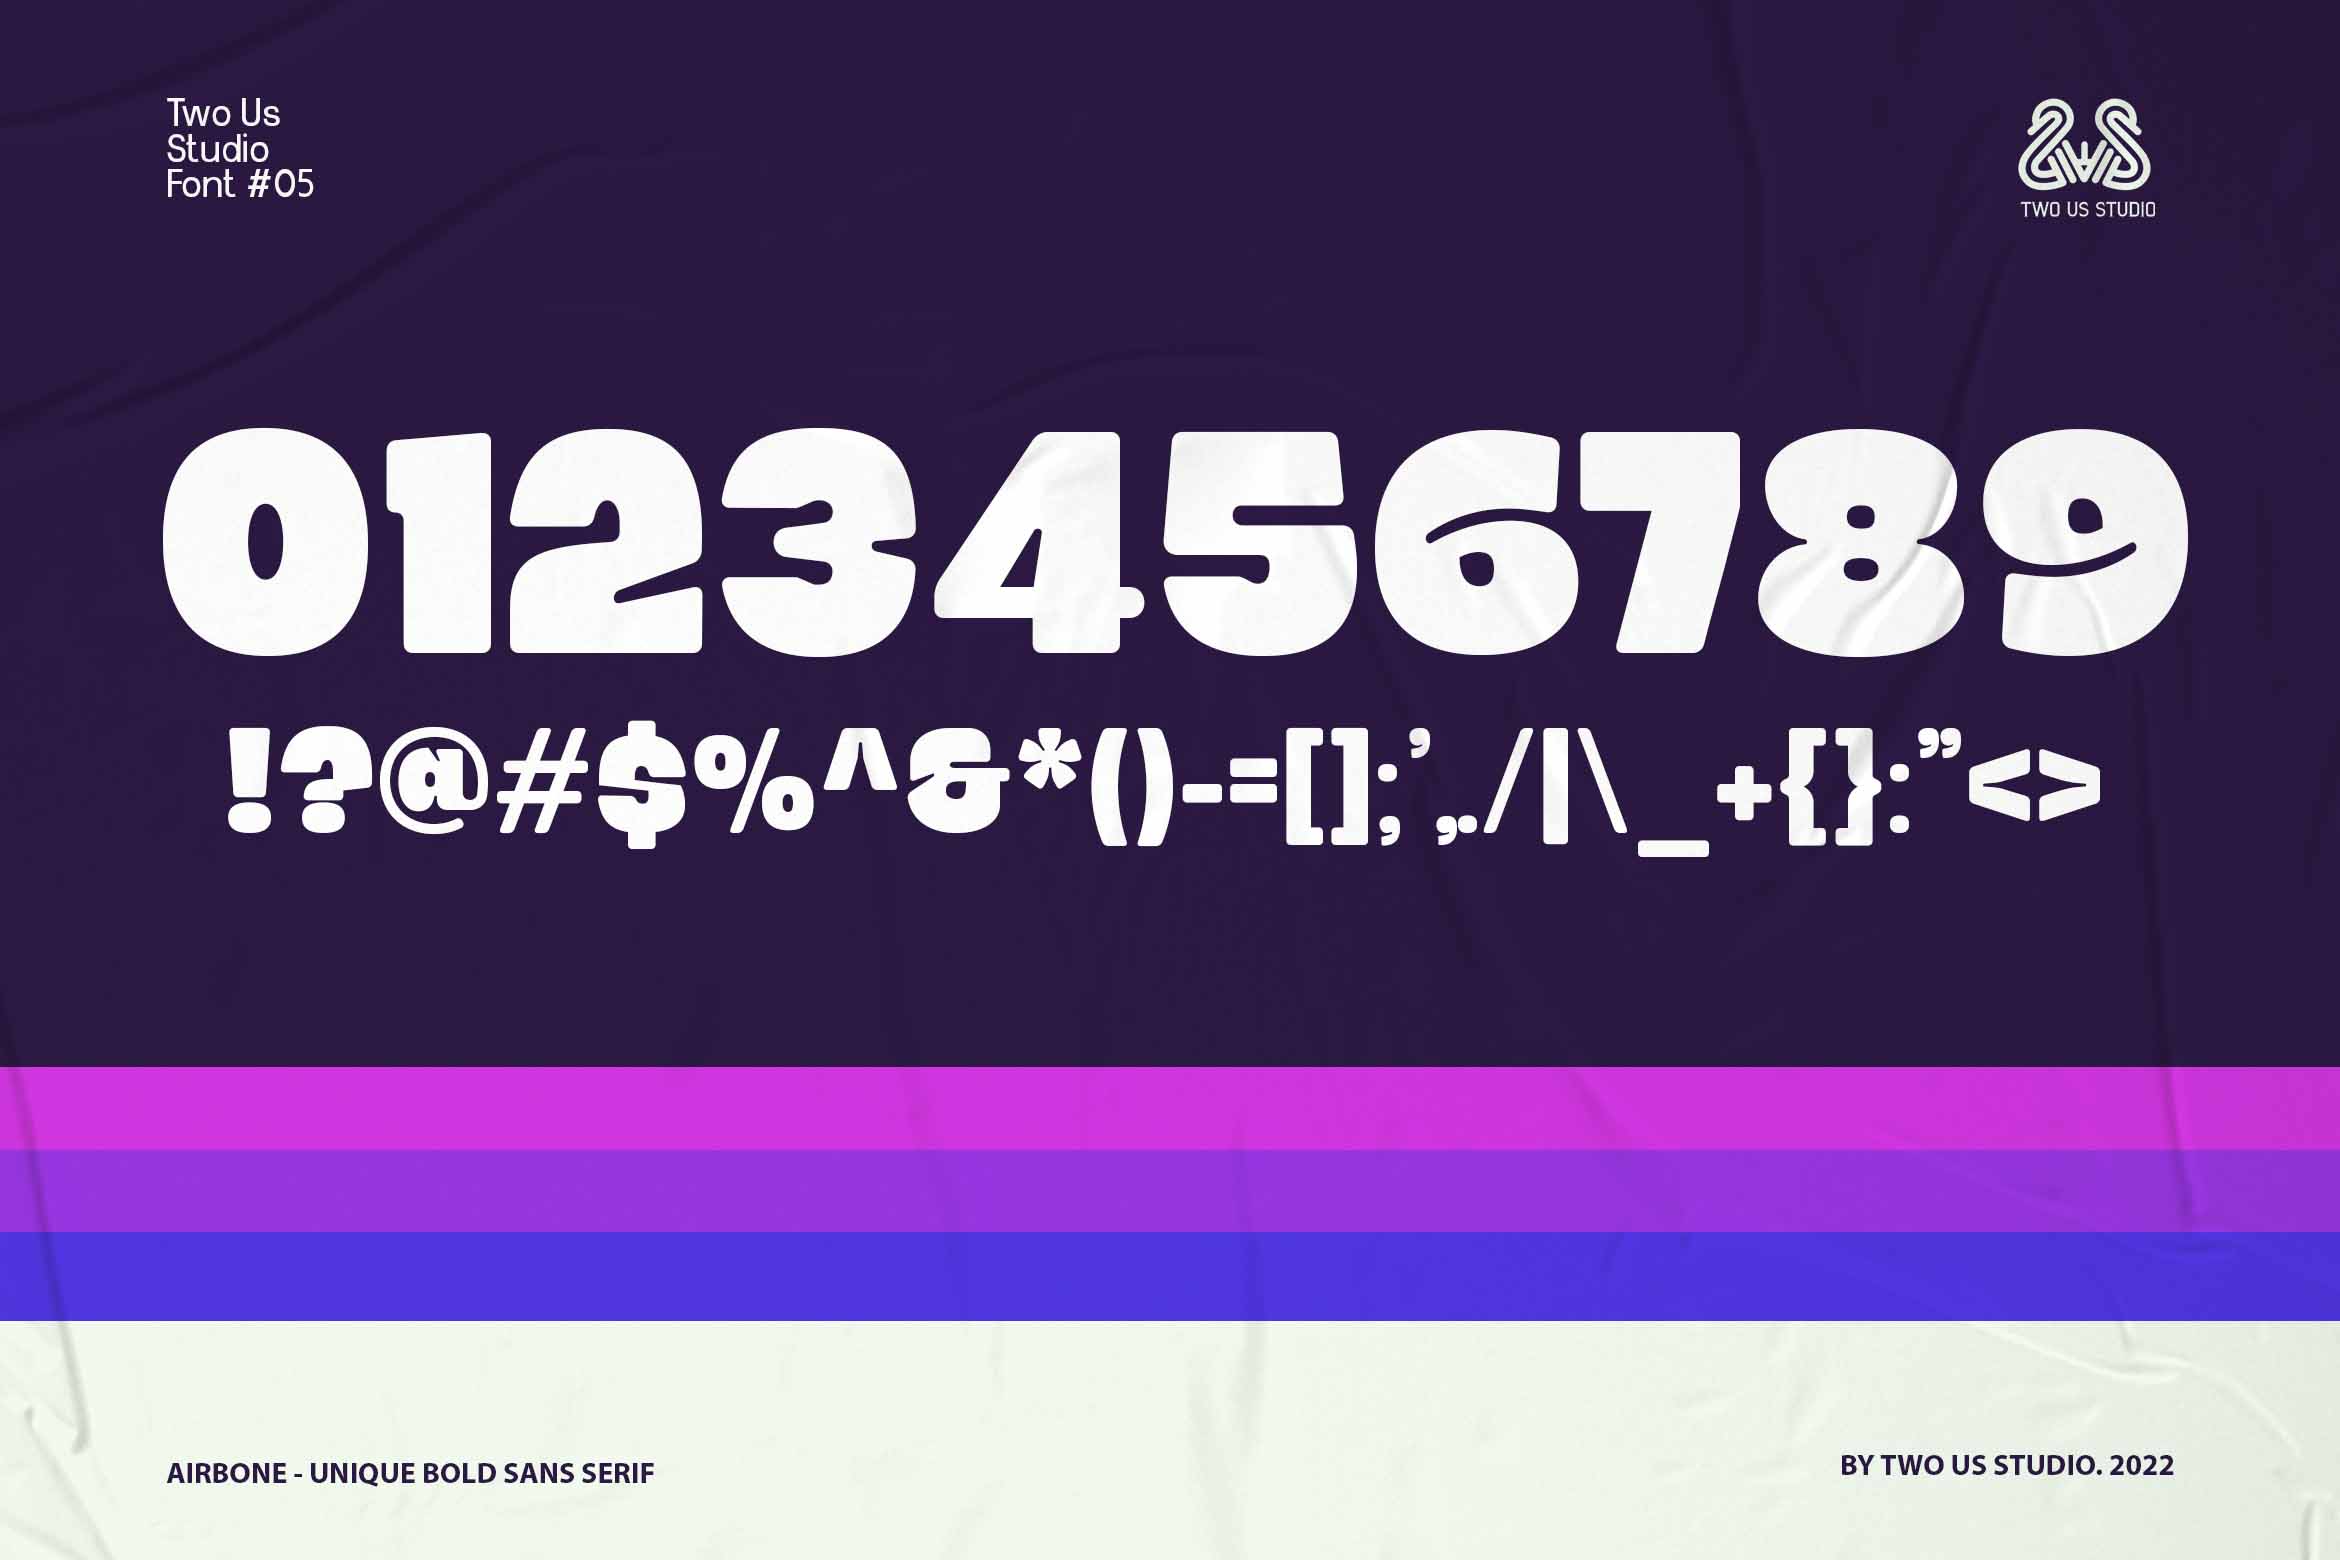 An image with numbers showing off the beauty of the font.